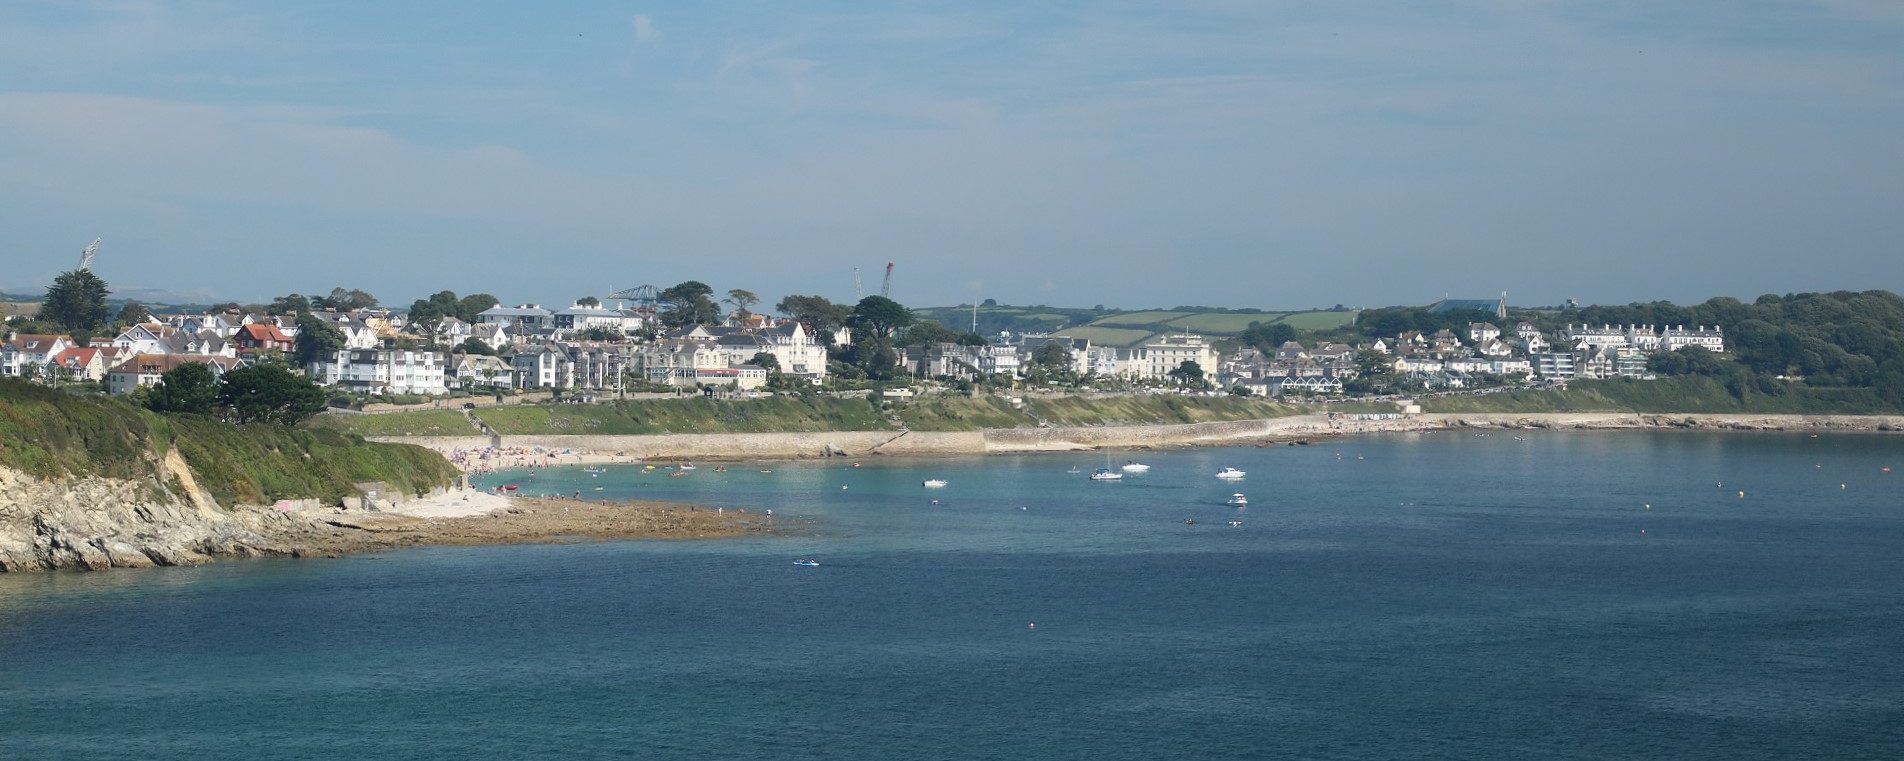 Hotels in Falmouth